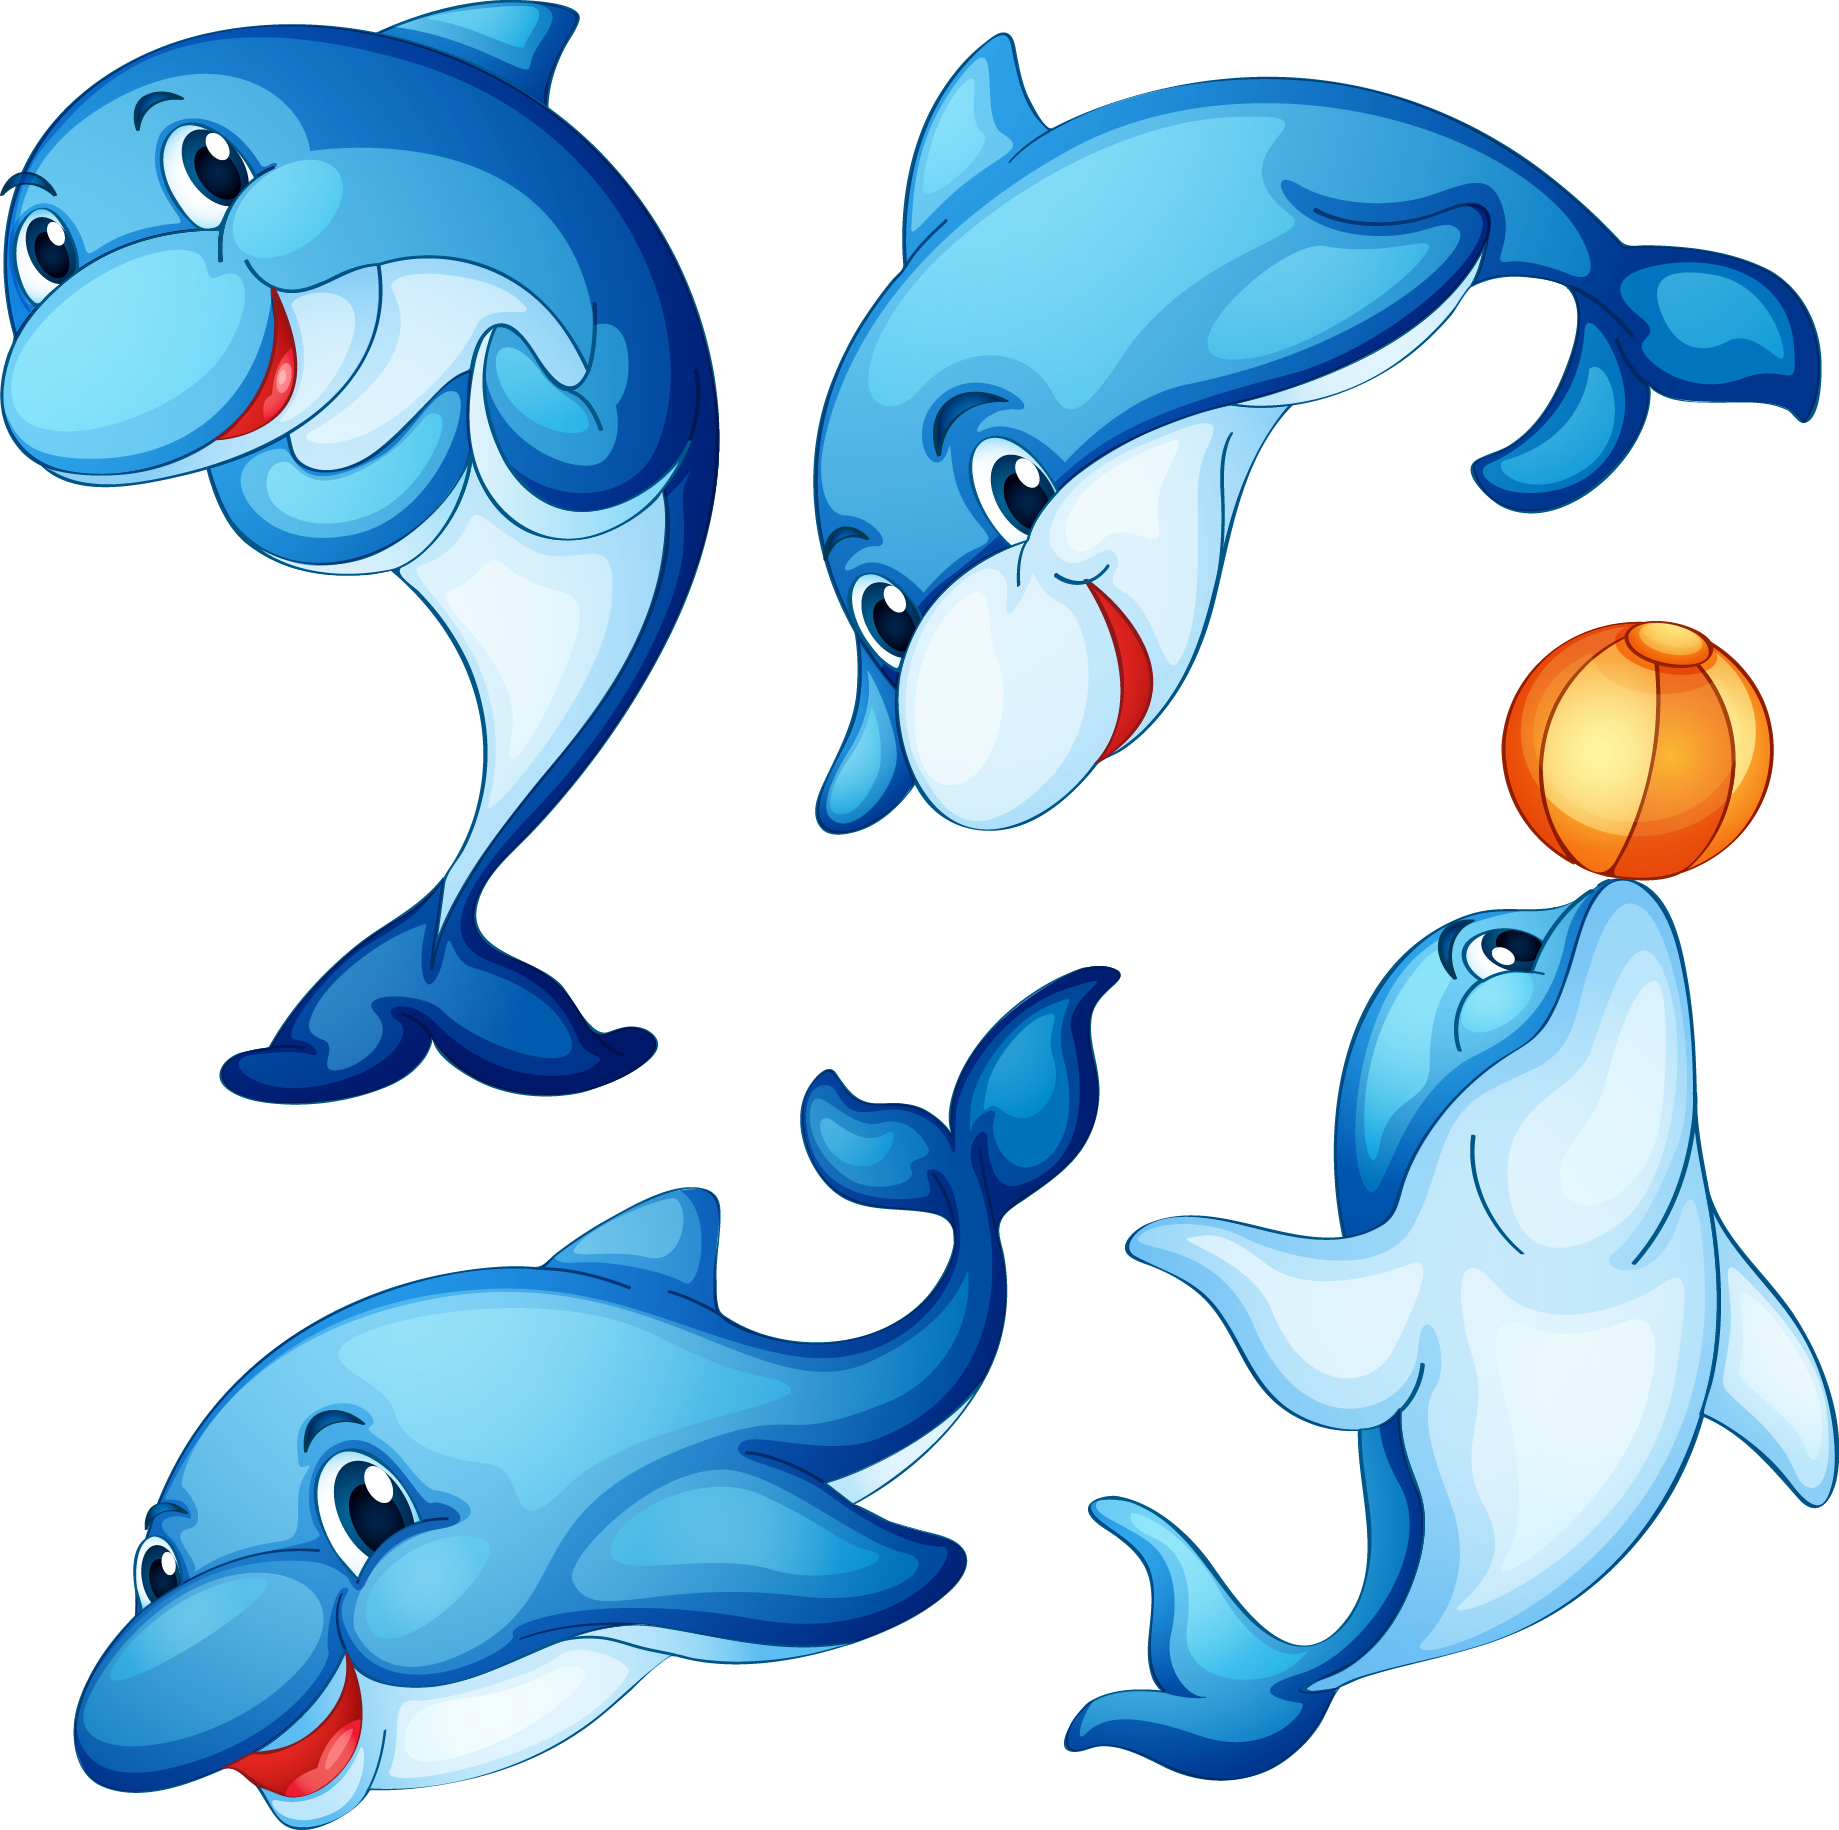 Royalty-free Dolphin Clip Art - Stickers Decals Size: 5 X 3.3 Inches Vinyl Color Print (1839x1830)